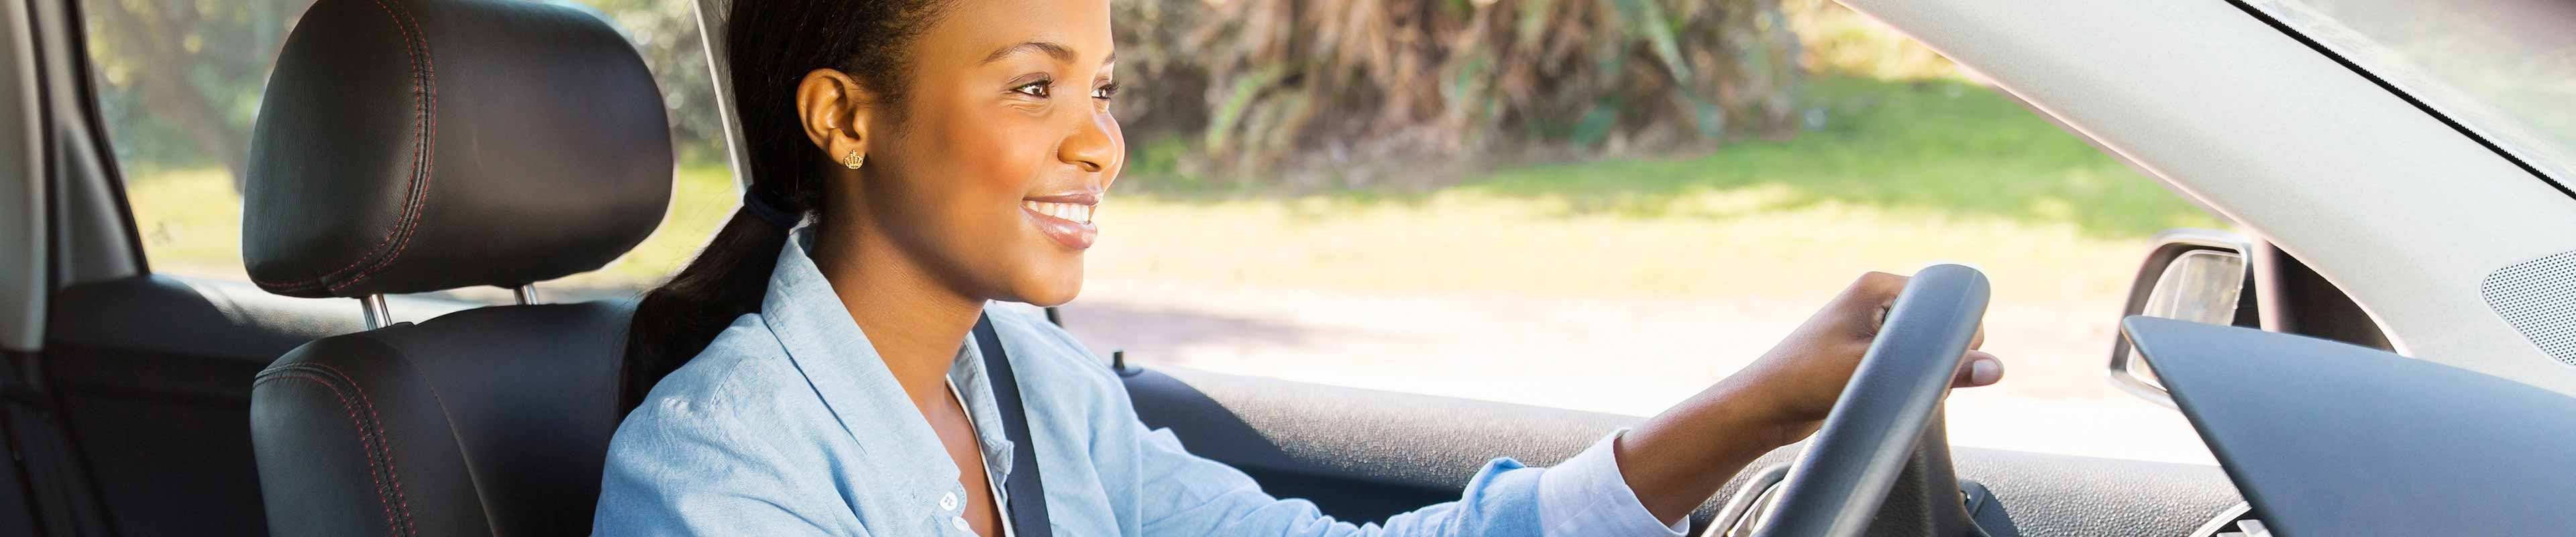 A woman driving a car safely and avoiding distracted driving.